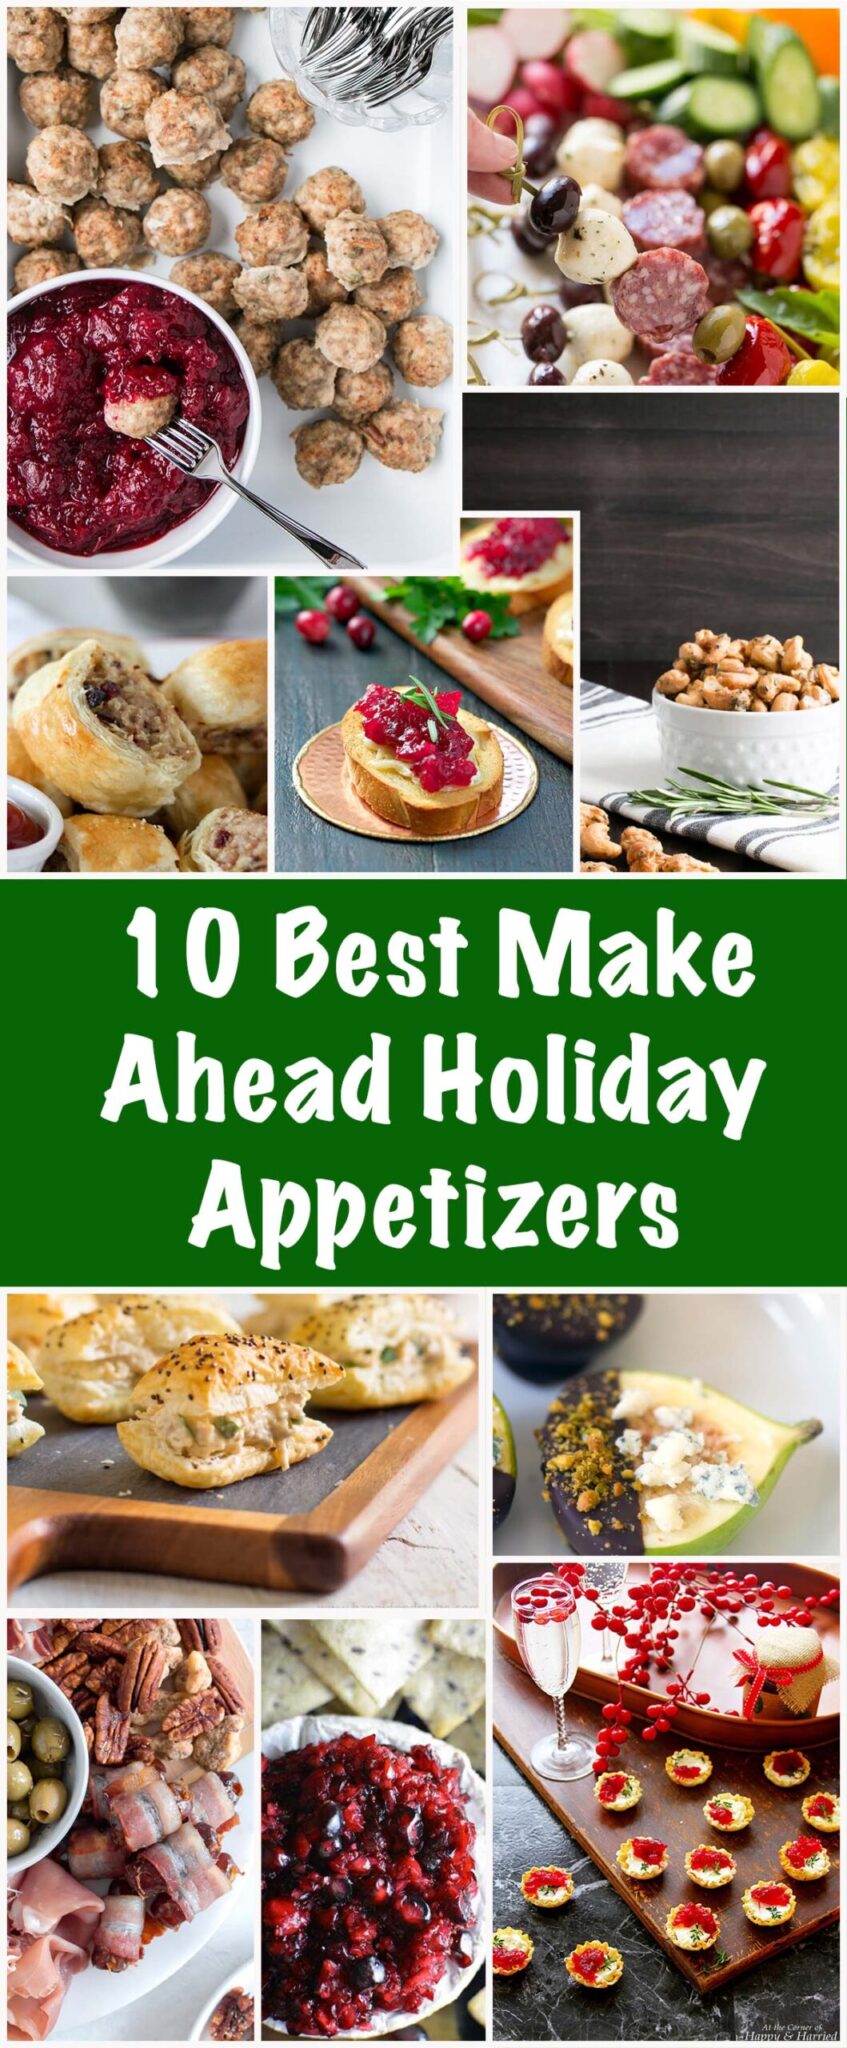 The 10 Best Make Ahead Holiday Appetizers are the perfect way to prepare for a holiday party without the stress! Some of these recipes can be made weeks in advance and parked in the freezer until you're ready to reheat them or make others a few days ahead of time and let them sit in the fridge. via @mykitchenlove